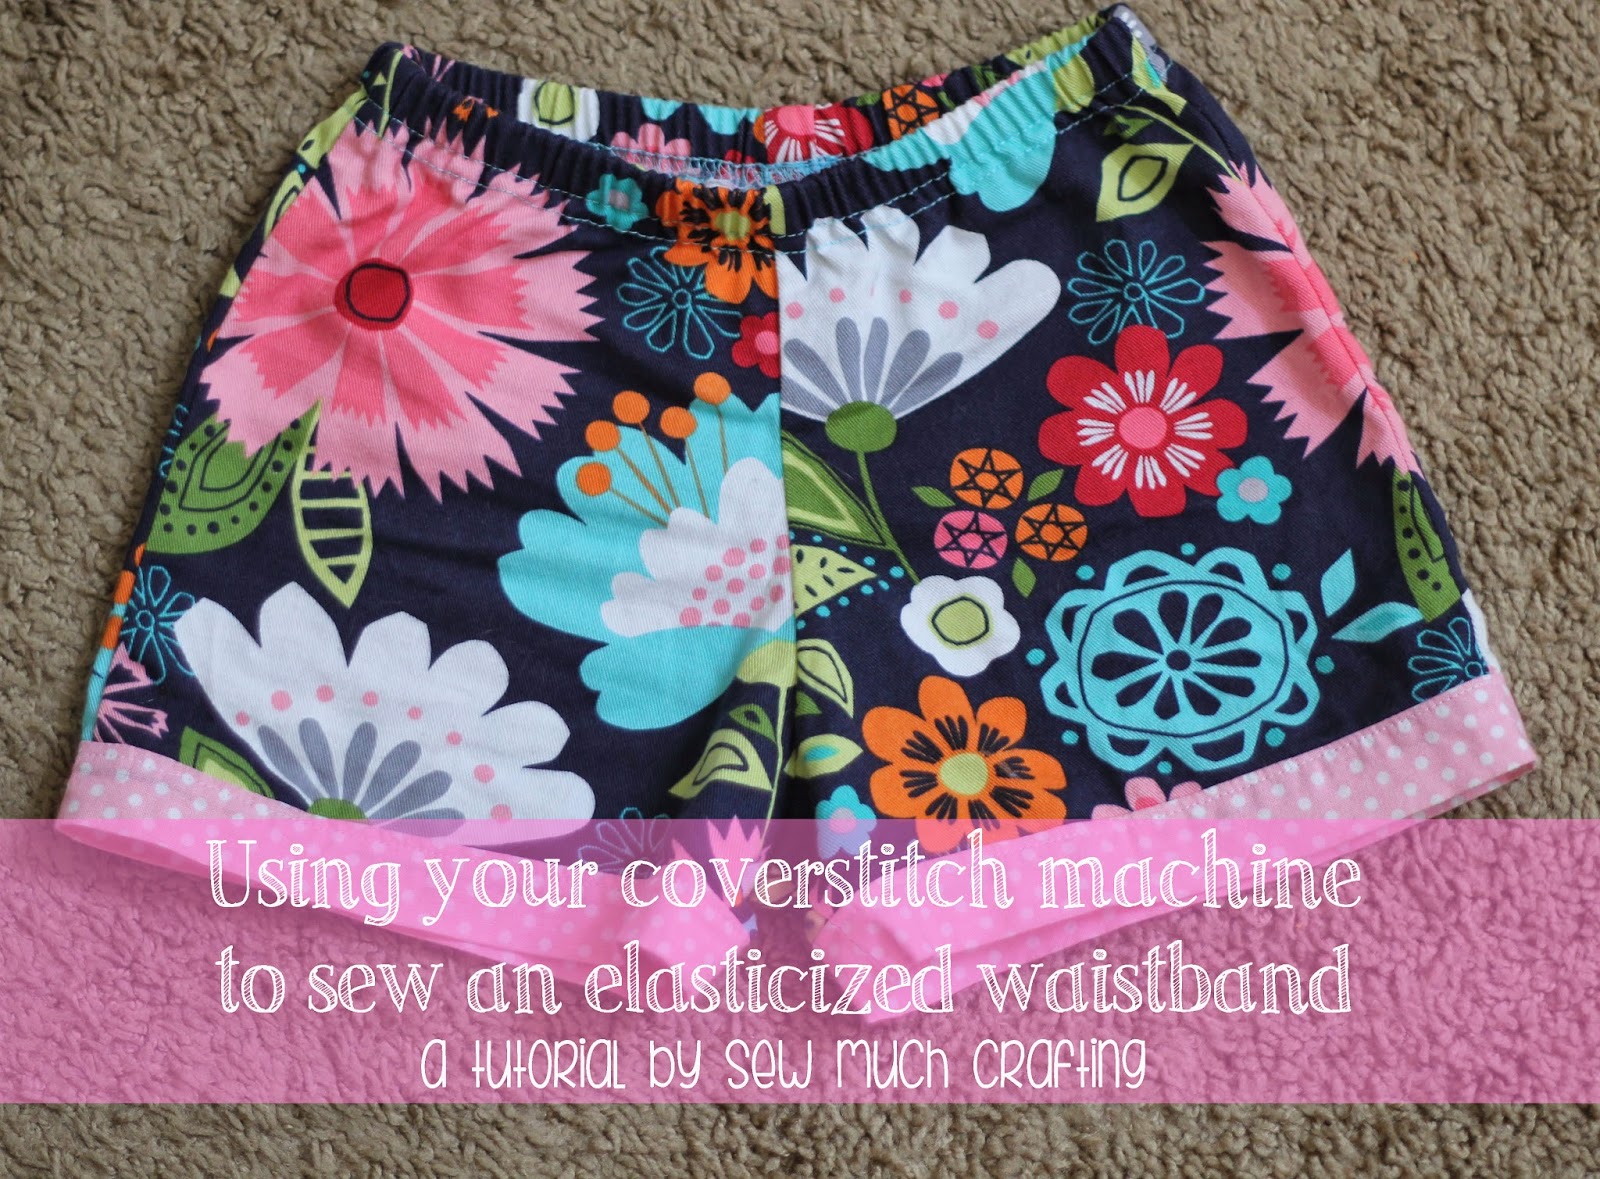 sew much crafting: Using your coverstitch machine to do an